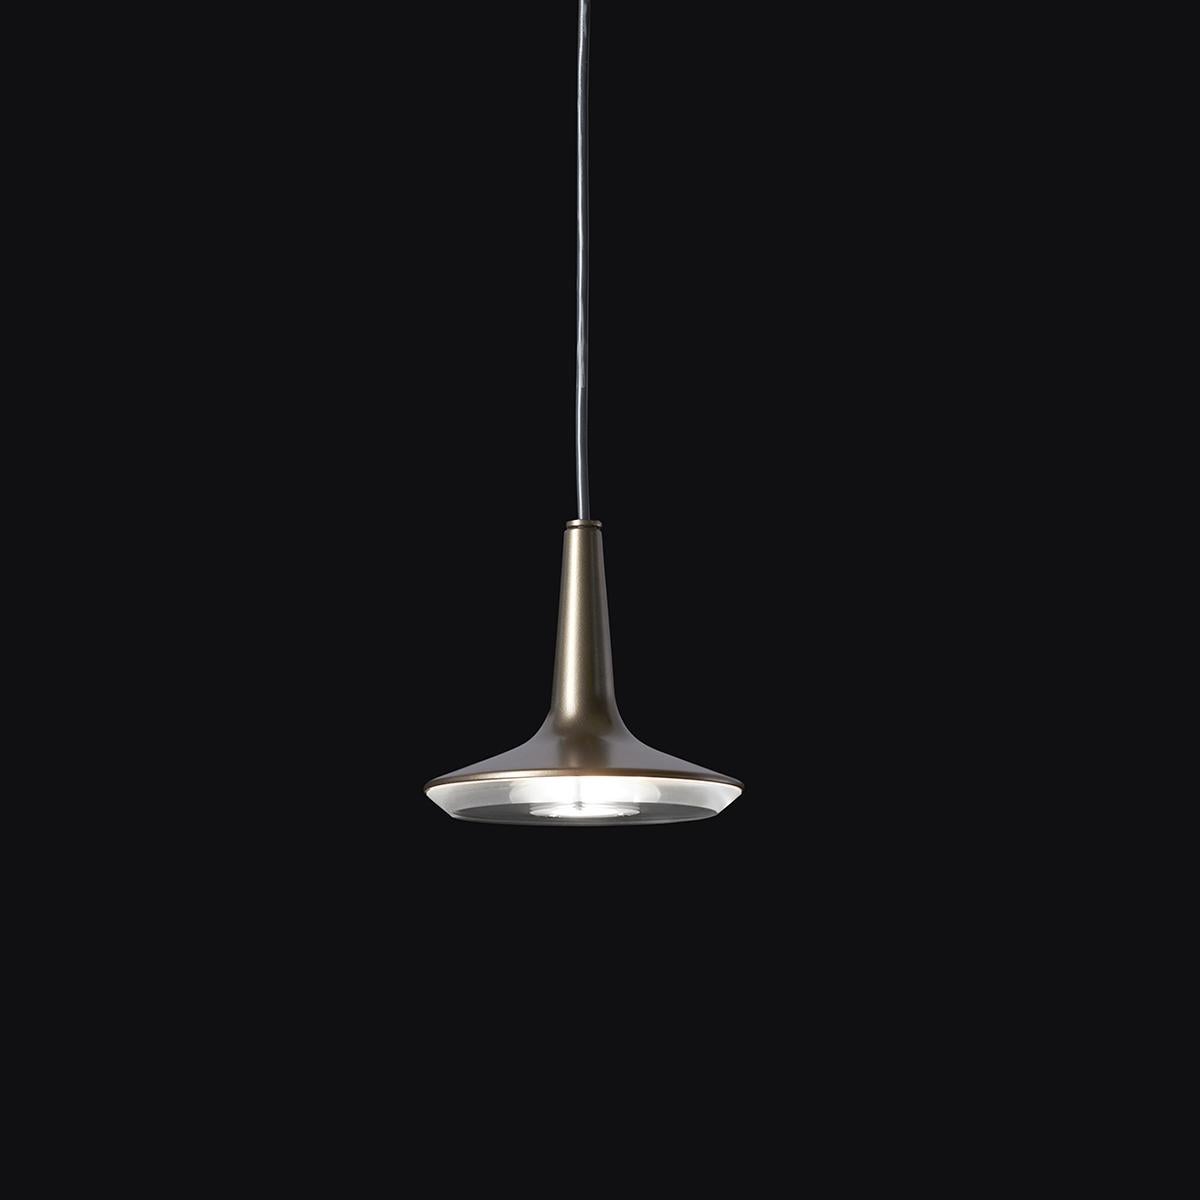 Suspension Lamp 'Kin' 478 designed by Francesco Rota in 2013.
Suspension lamp giving direct and diffused light. Metal turned body lamp. PMMA transparent diffuser. Manufactured by Oluce, Italy.

A cast aluminium body with a Led core are the